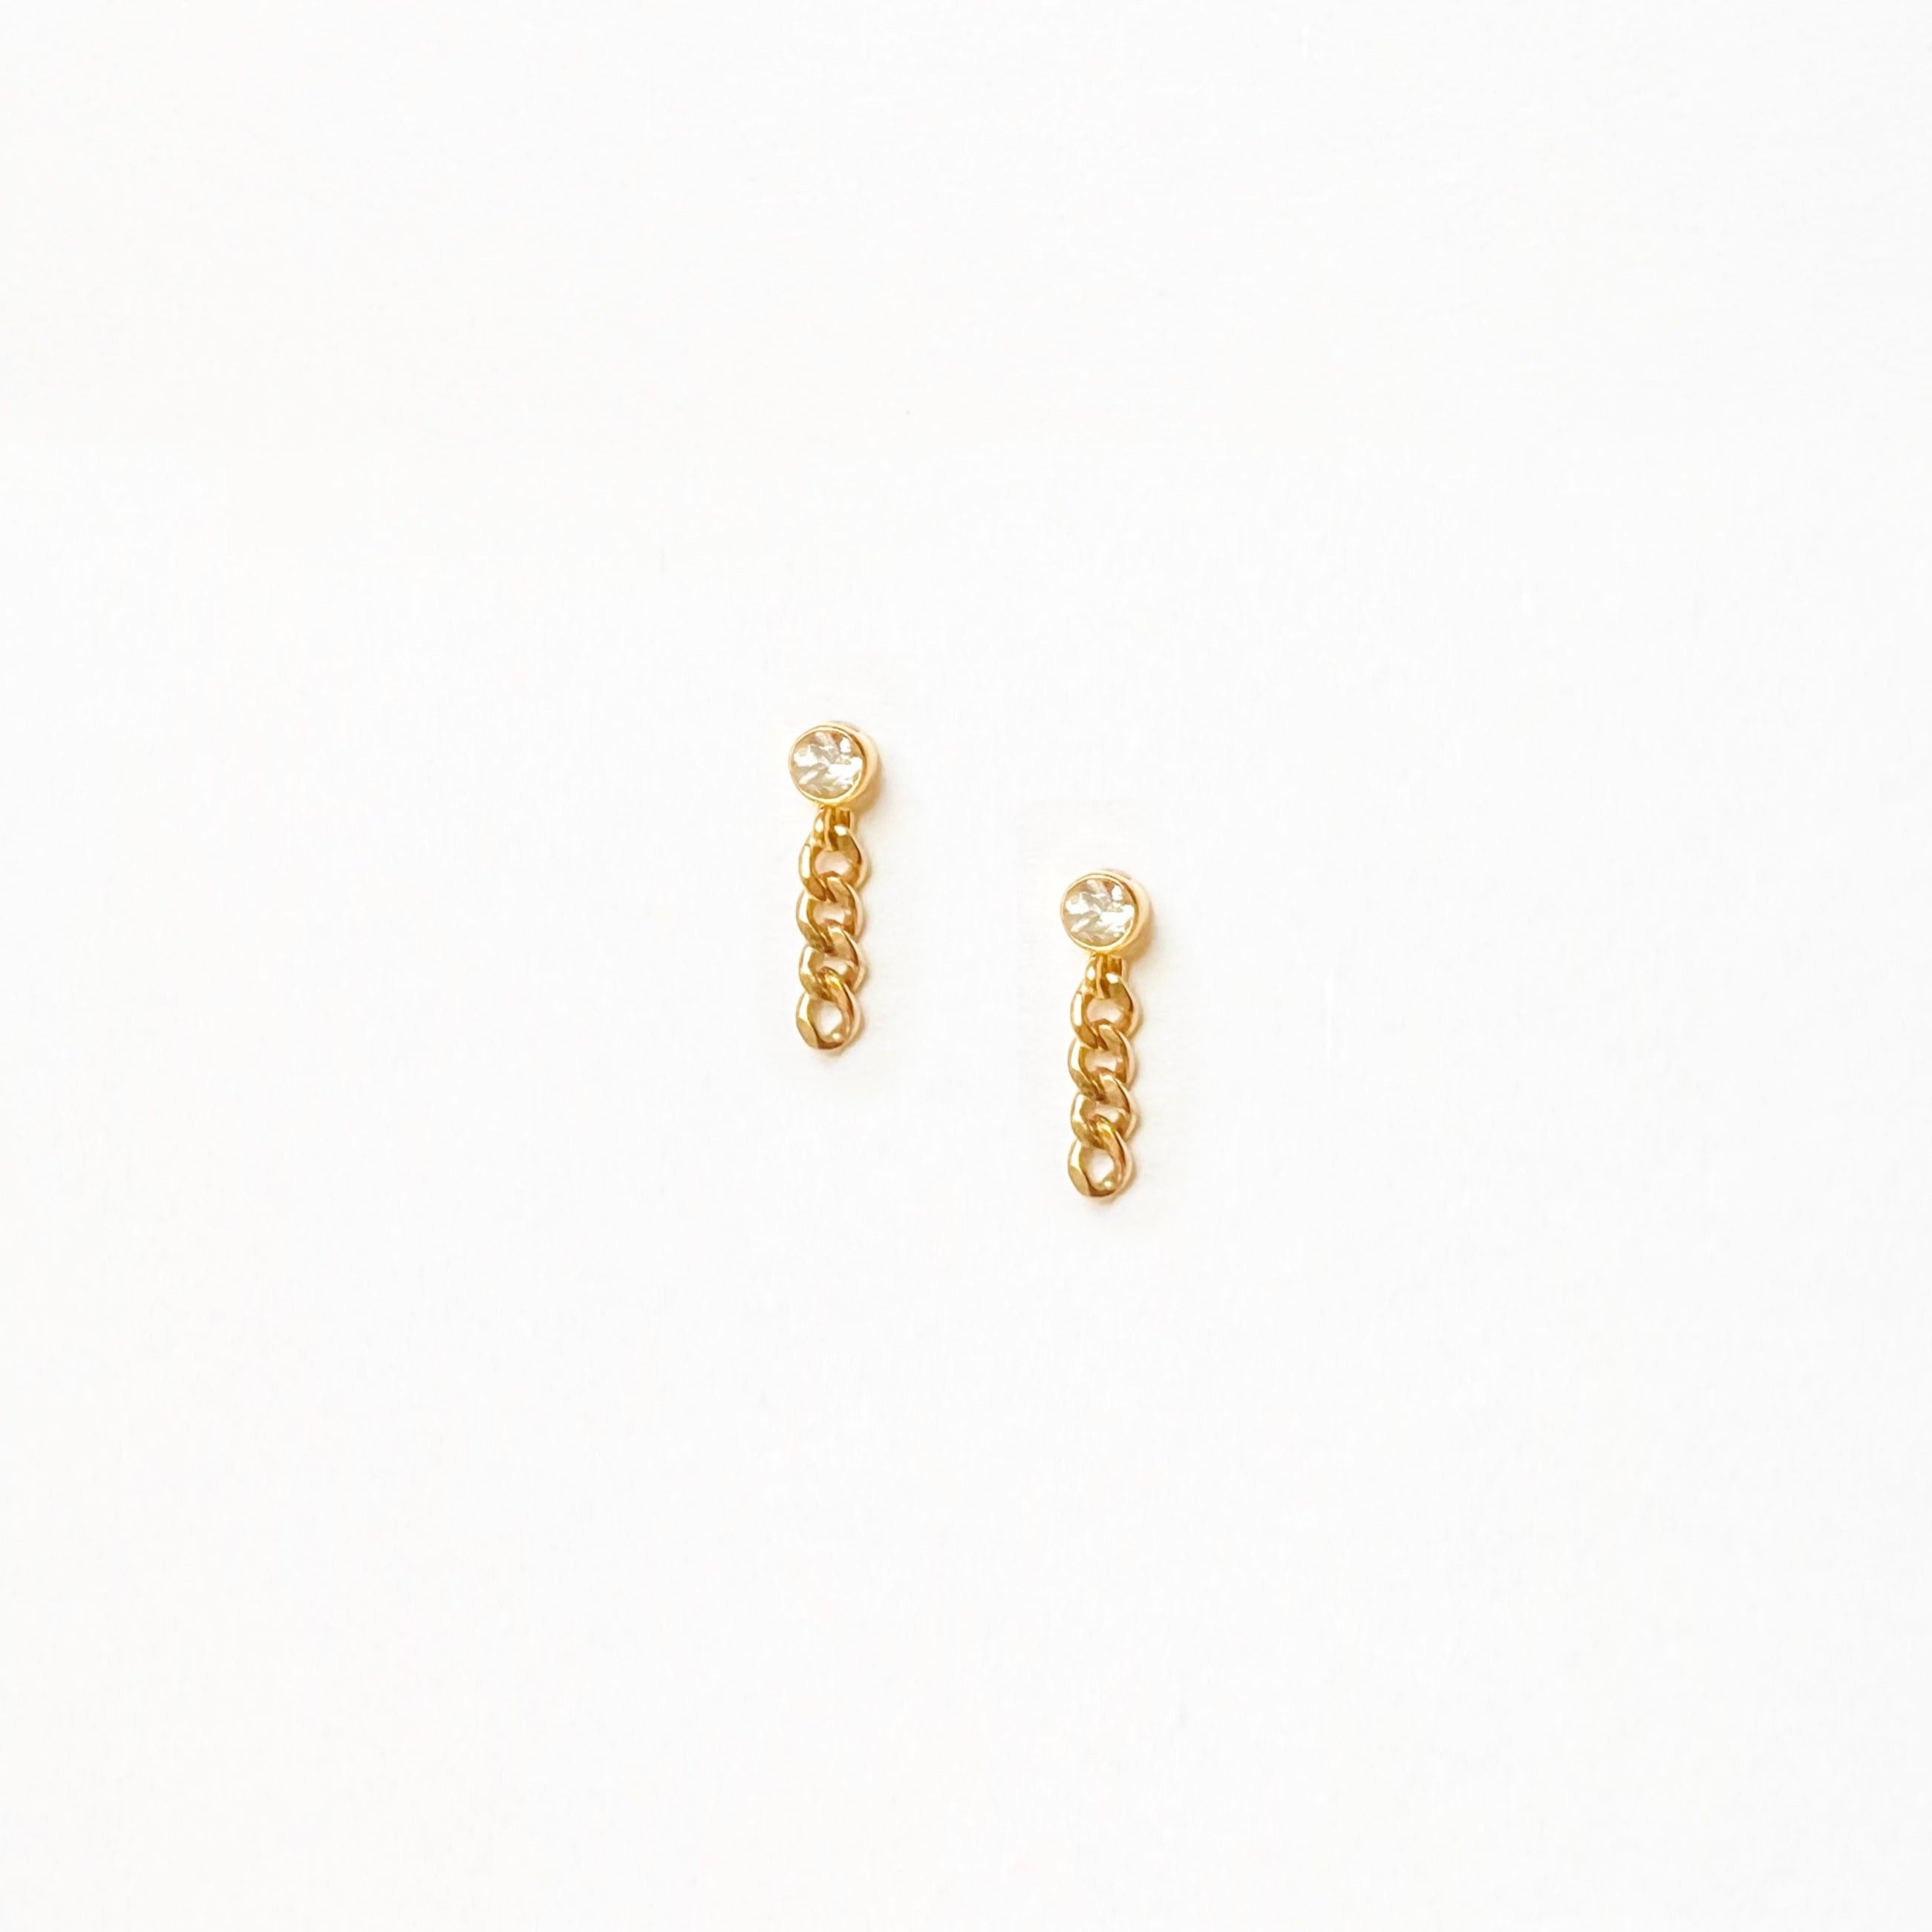 Gold Chain Drop Earrings with a White Gemstone